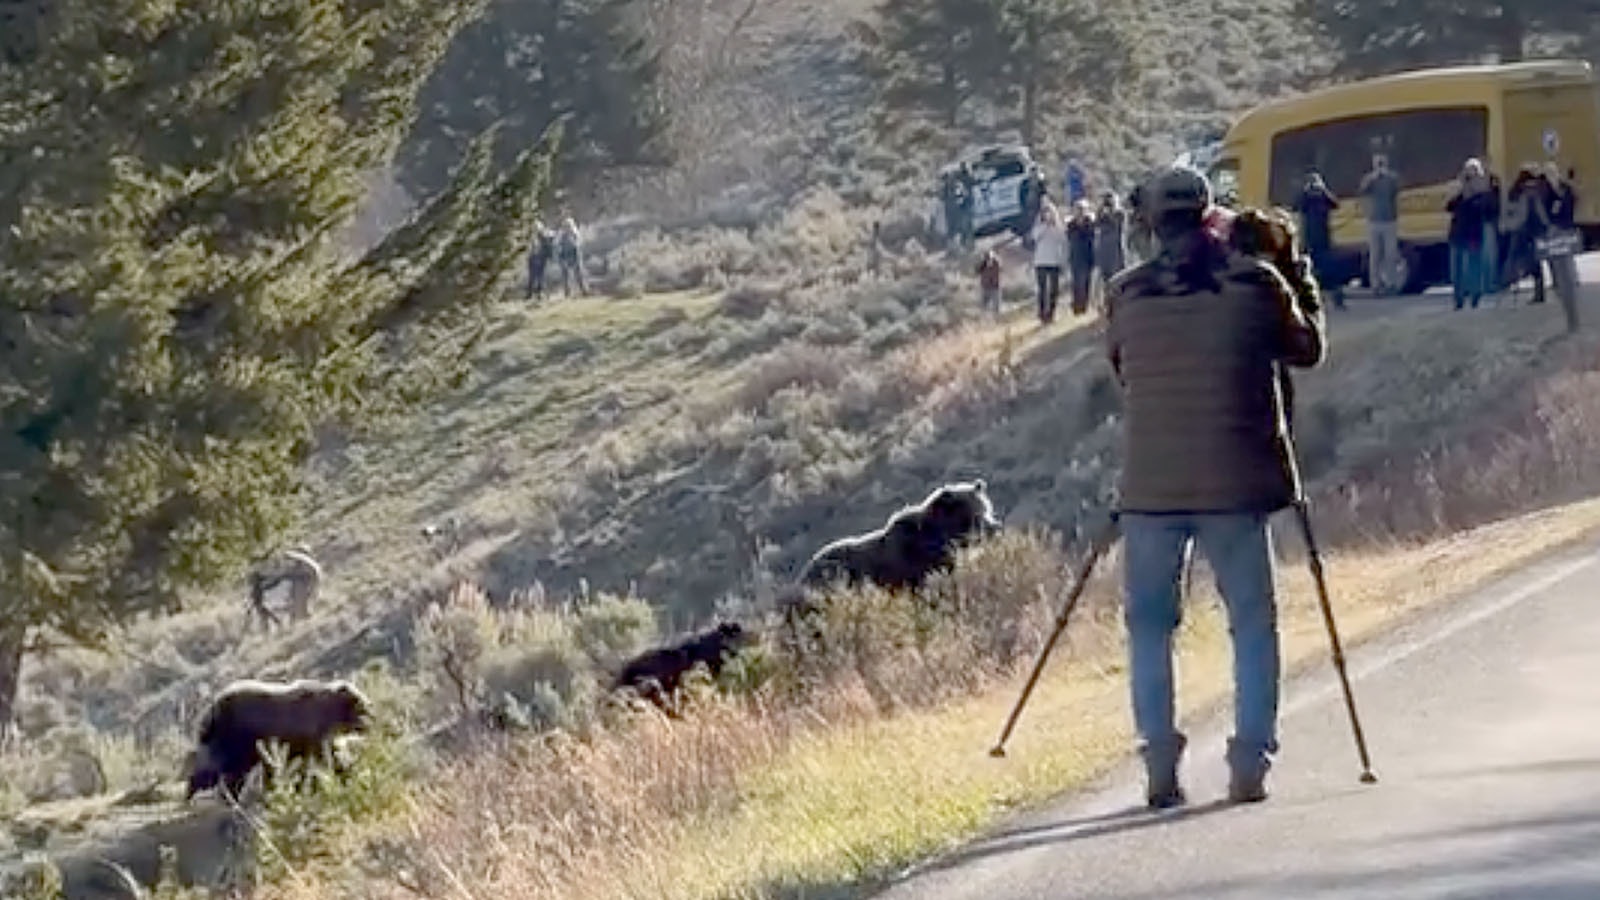 This screenshot from video shows a photographer deliberately being too close to a Yellowstone grizzly and her cubs. The tour guide who shot the video says he told the photographer multiple times to back off to a safe distance, but was ignored.